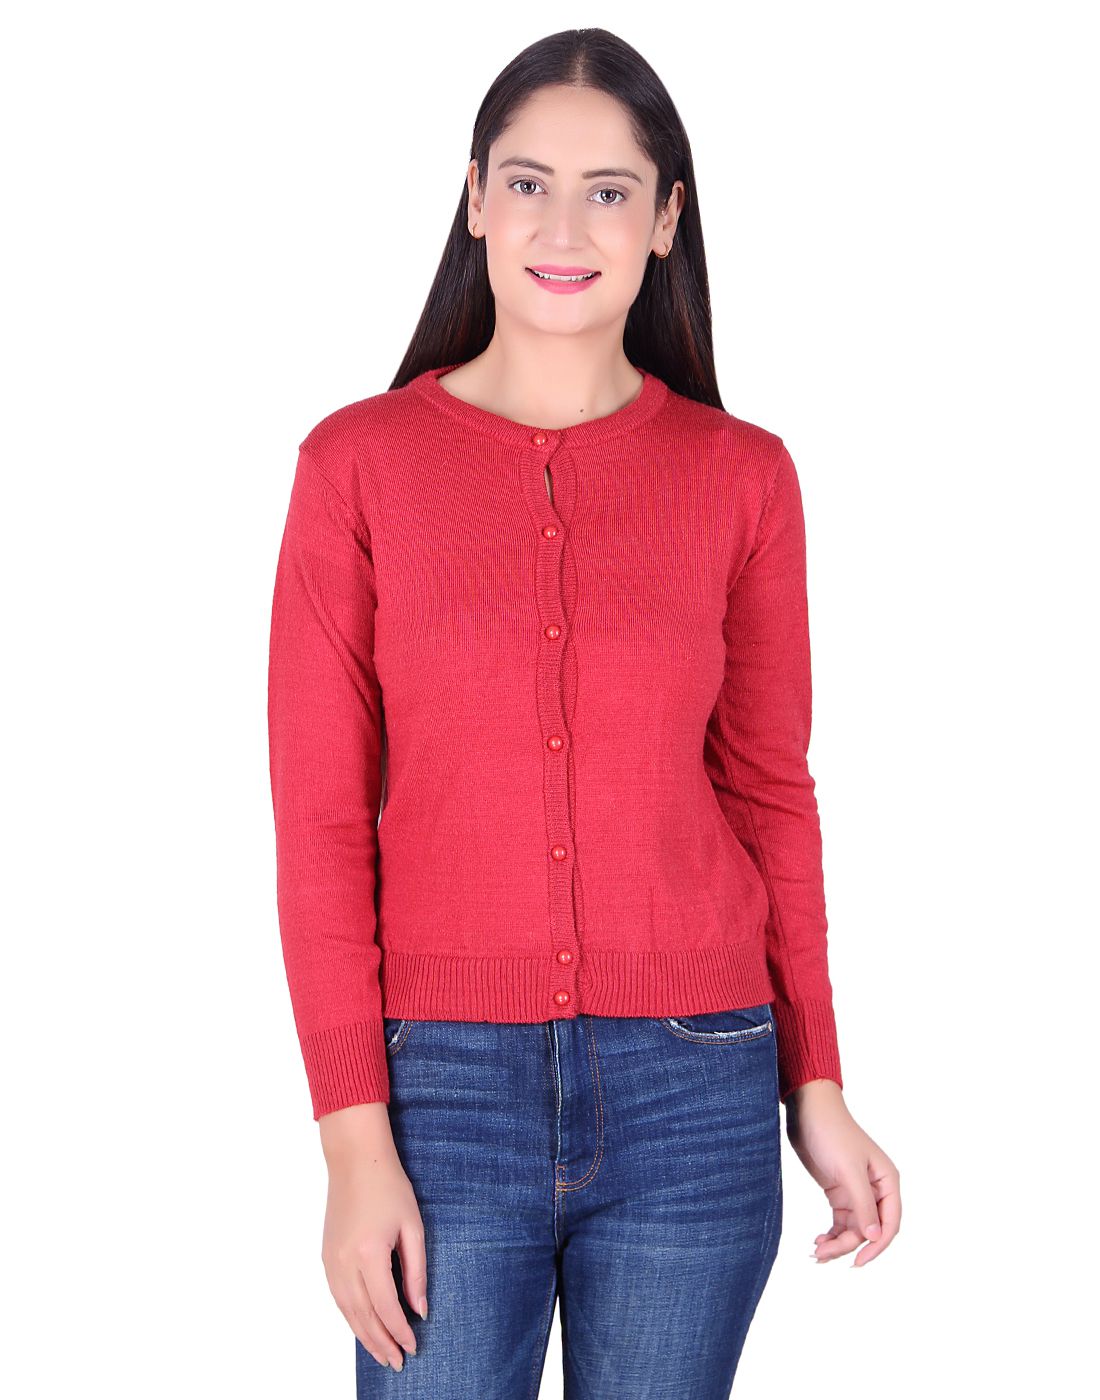 Ogarti Acrylic Rust Buttoned Cardigans